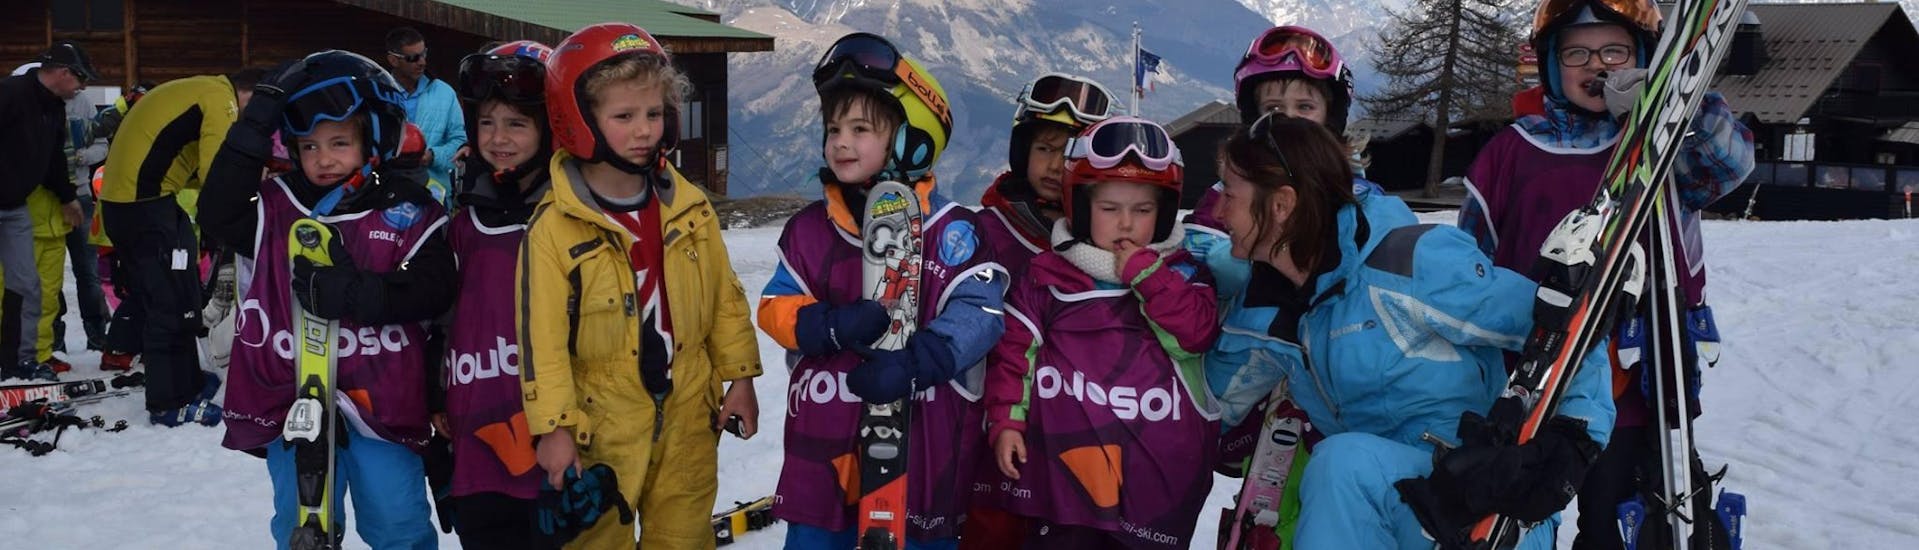 Kids Ski Lessons (5-12 years) - Afternoon - End of February - keep 4 reviews.